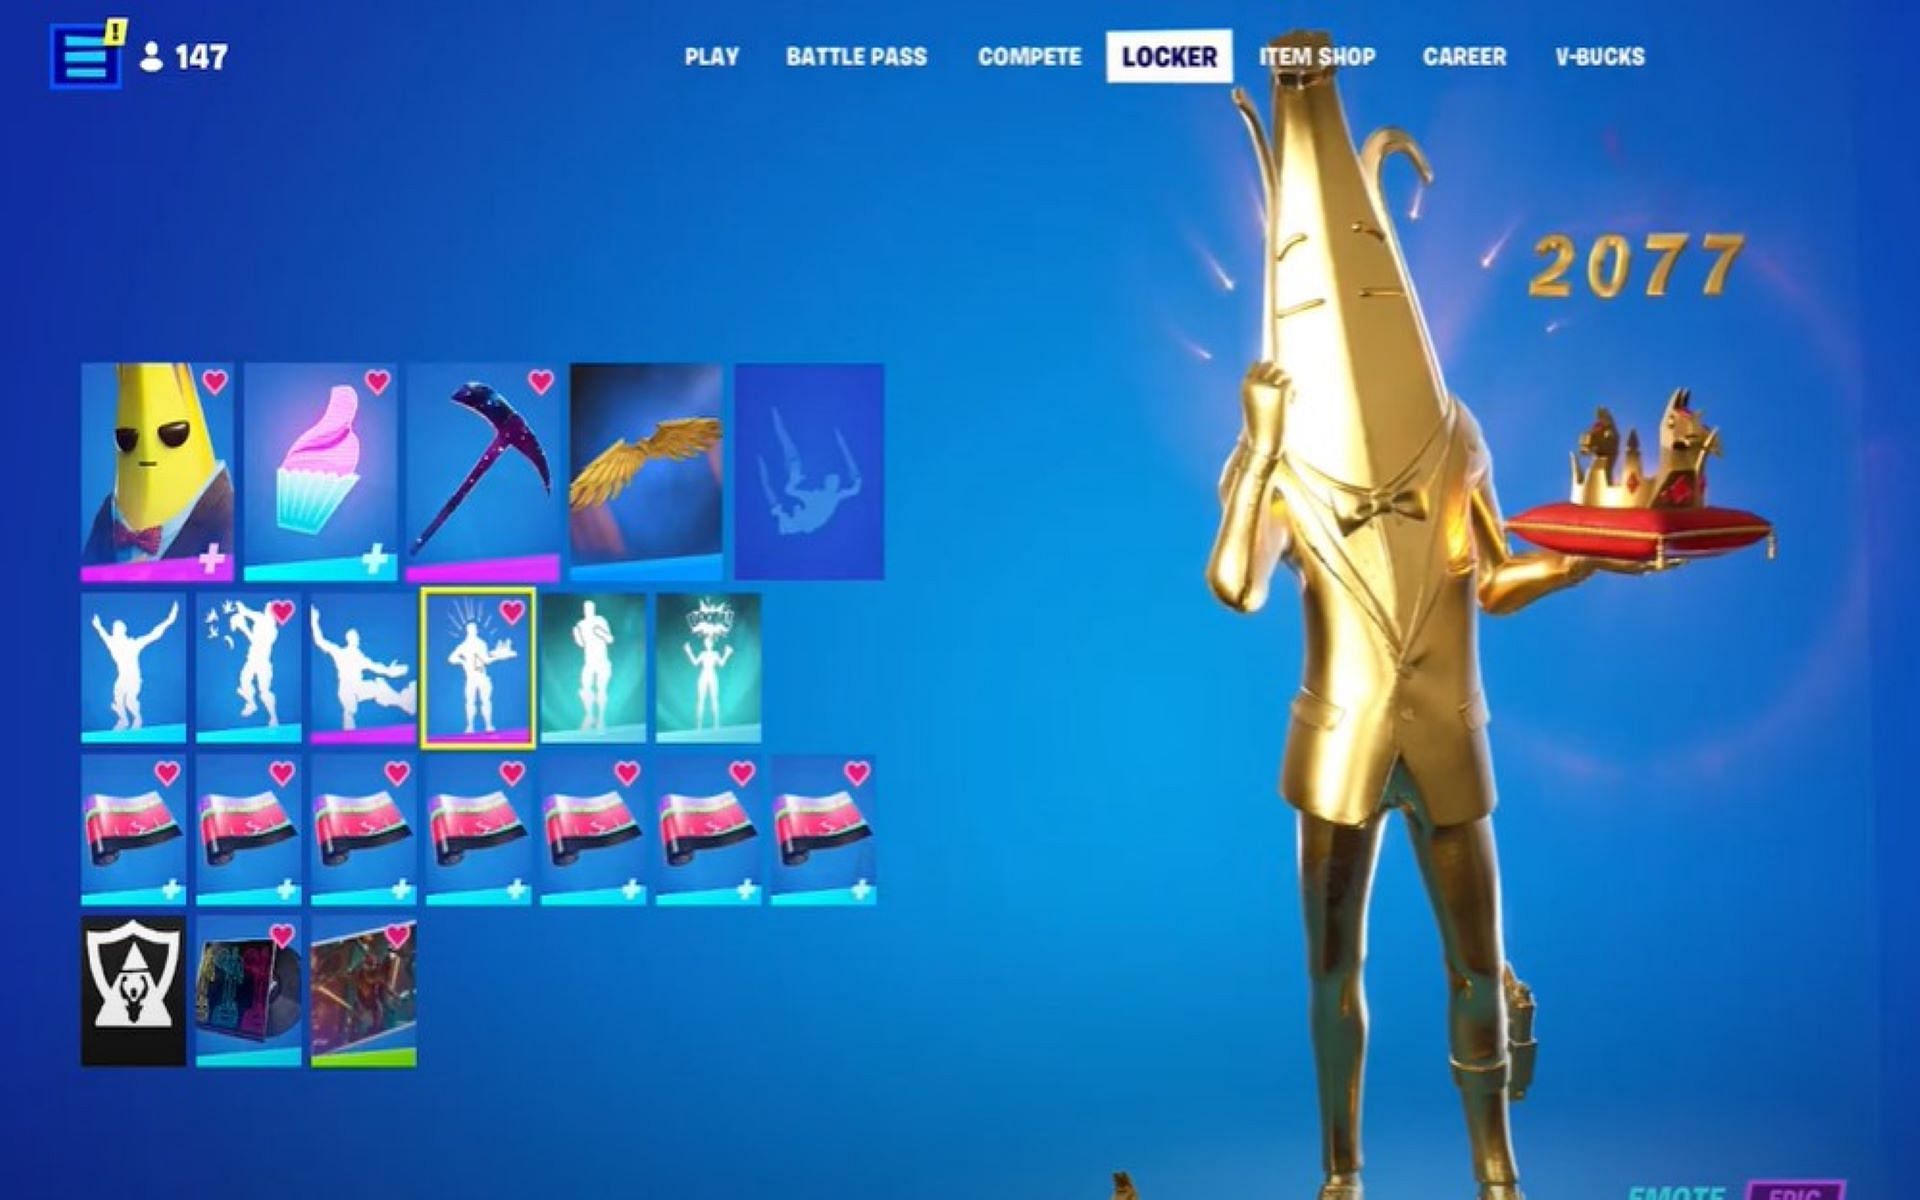 Fortnite player sets a new world record with over 2069 crowned Victory